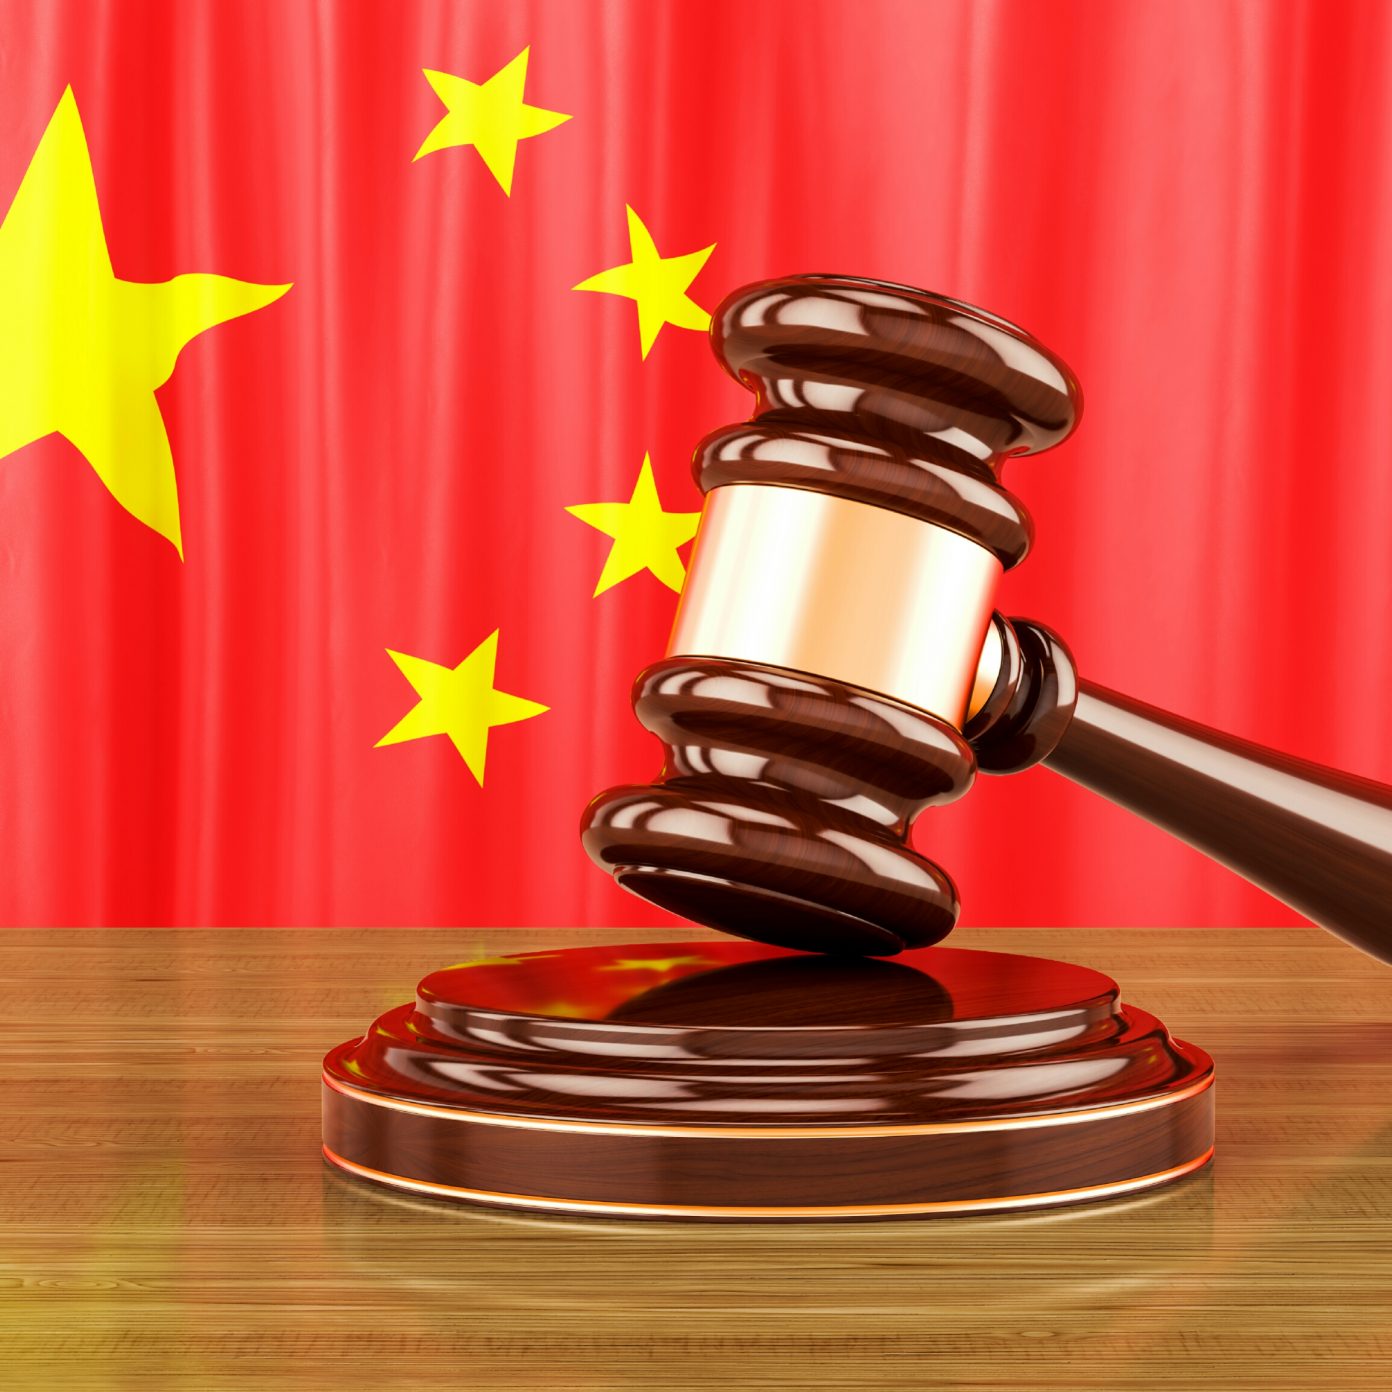 China Announces New Regulations for Blockchain Companies 'to Promote Healthy Development'